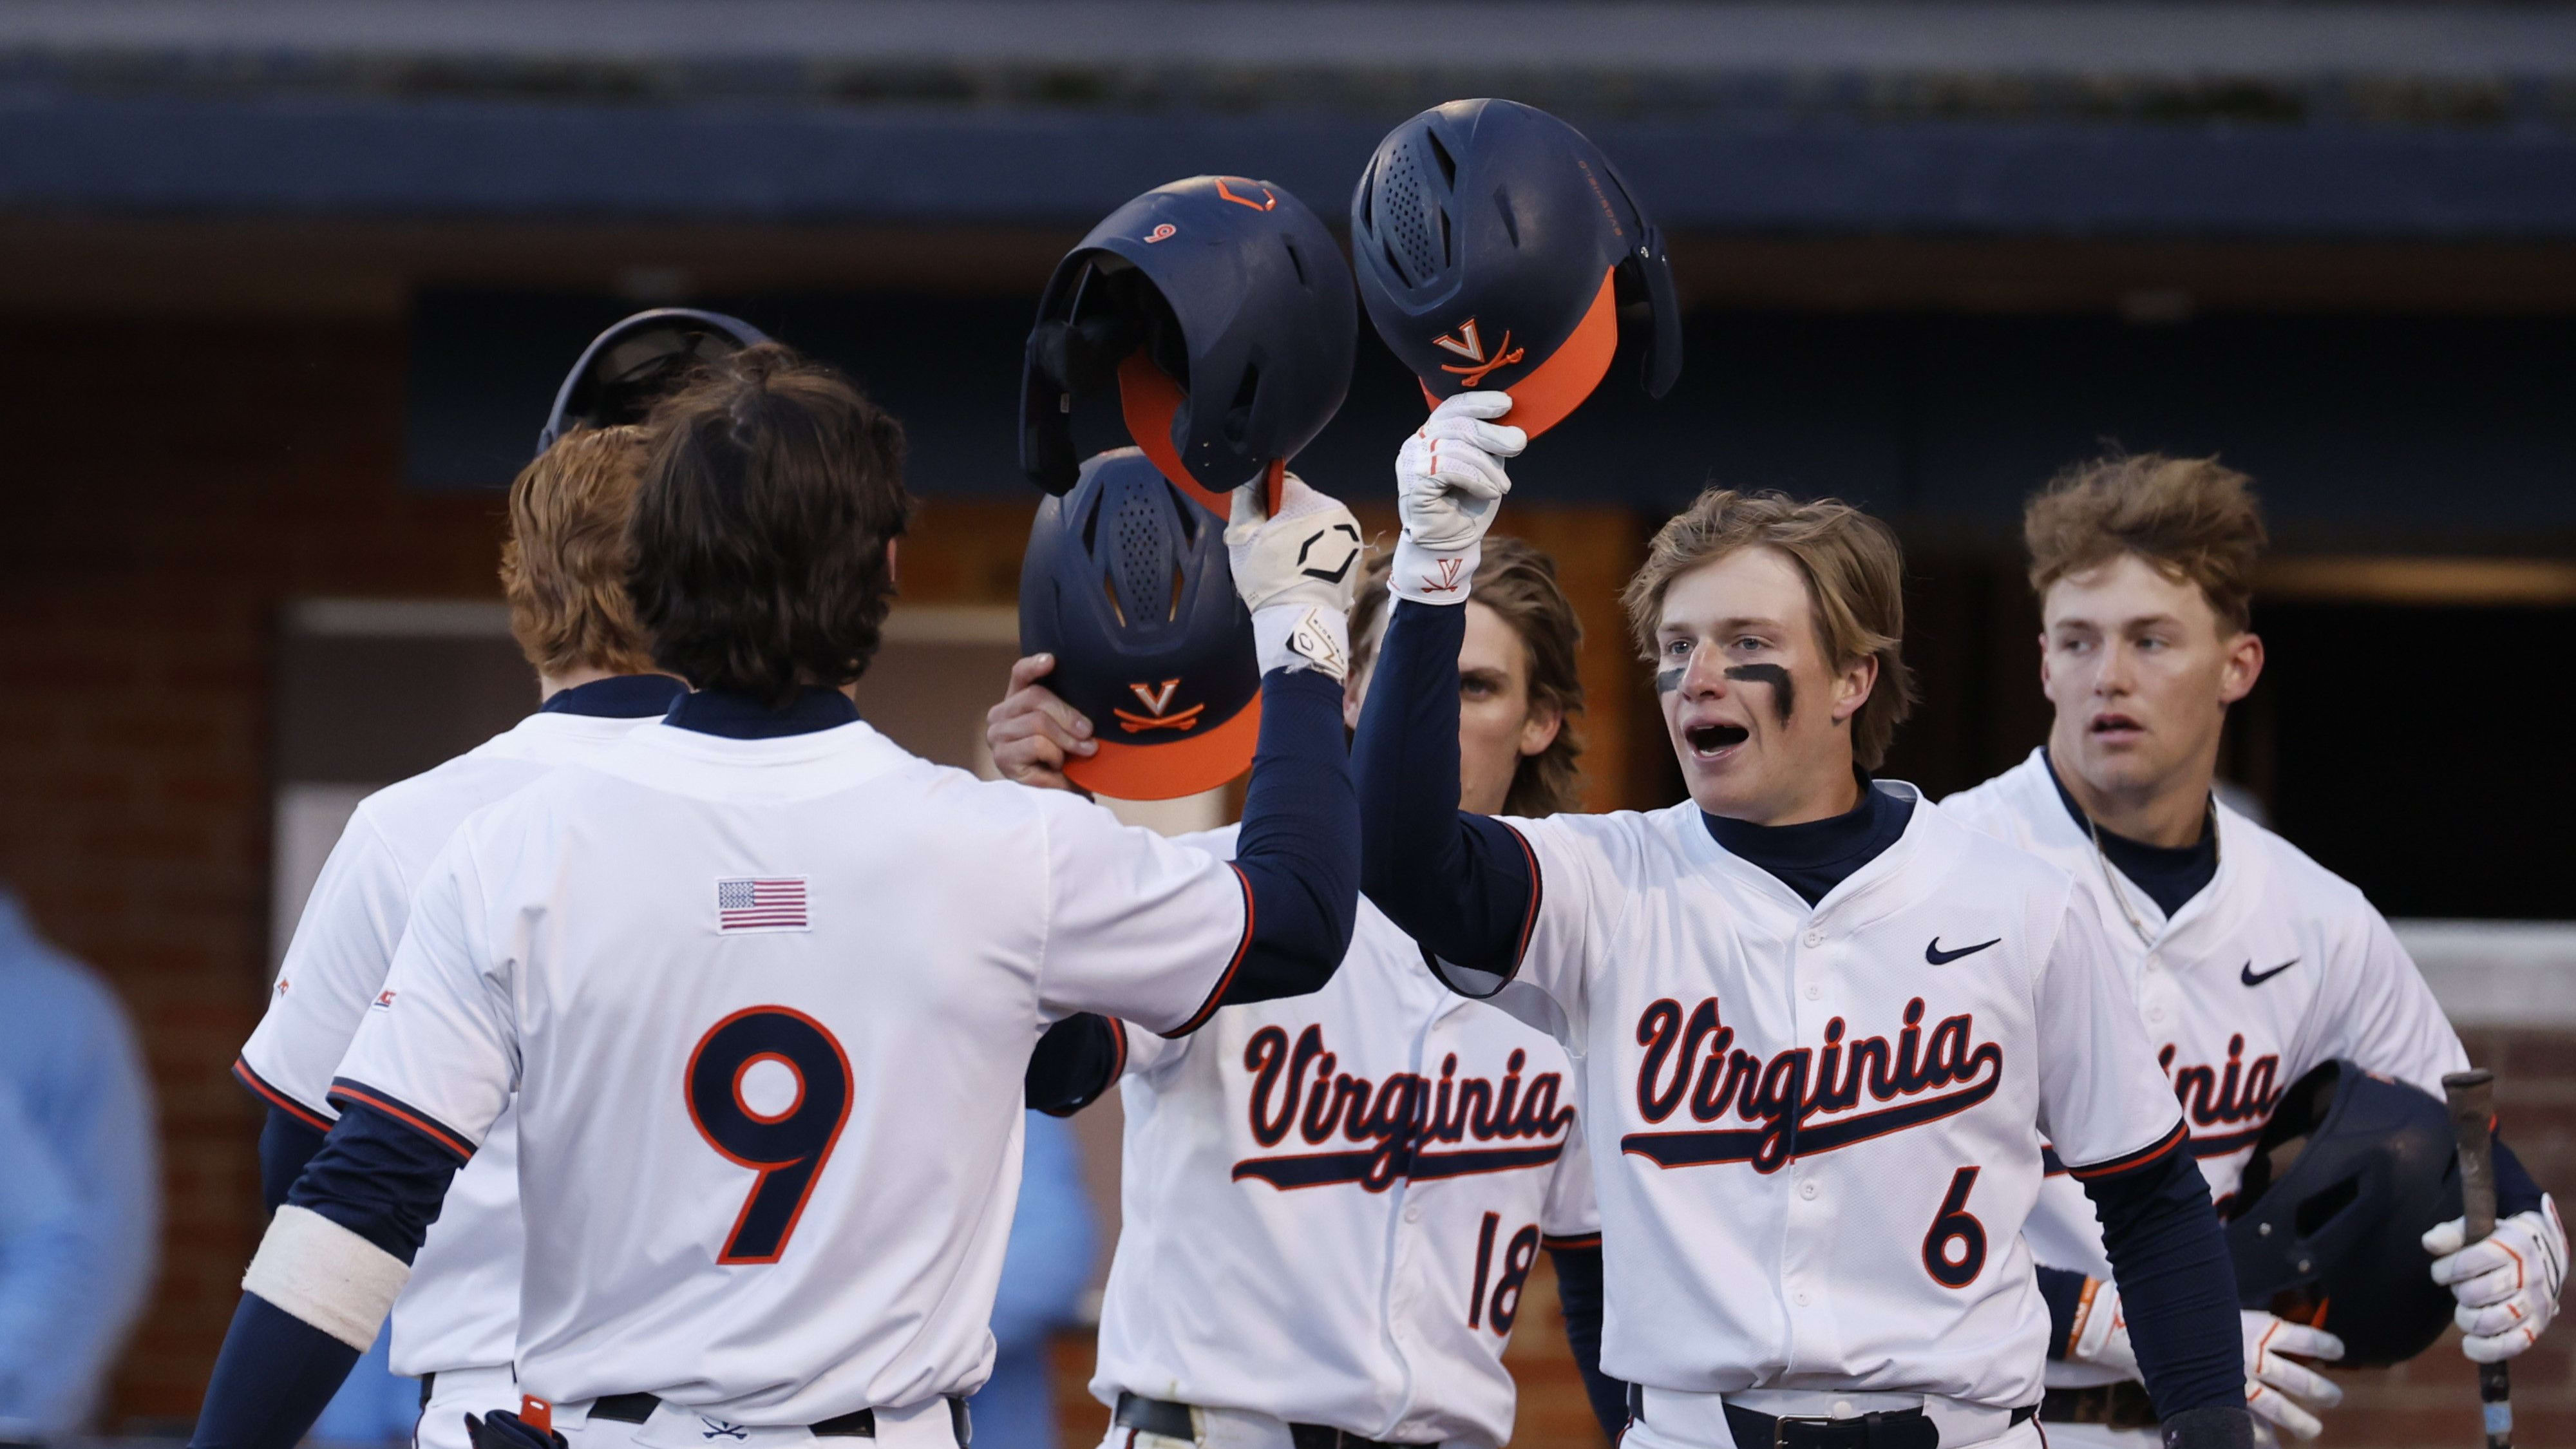 Henry Ford (9) celebrates with his teammates after hitting a grand slam during the Virginia baseball game vs. North Carolina.